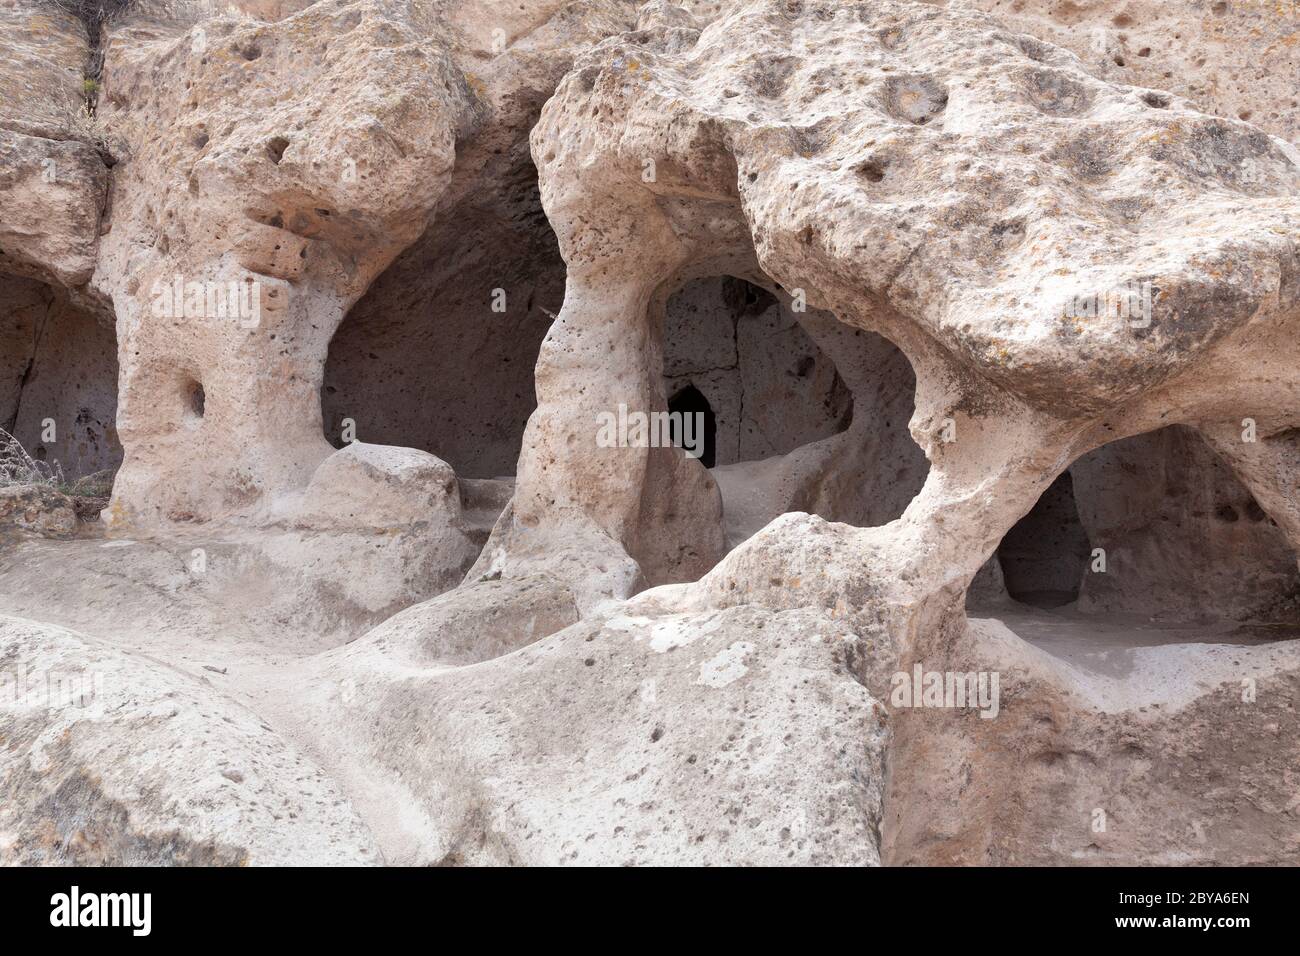 NM00635-00...NEW MEXICO - The Tsankawi Section of Bandelier National Monument. Stock Photo